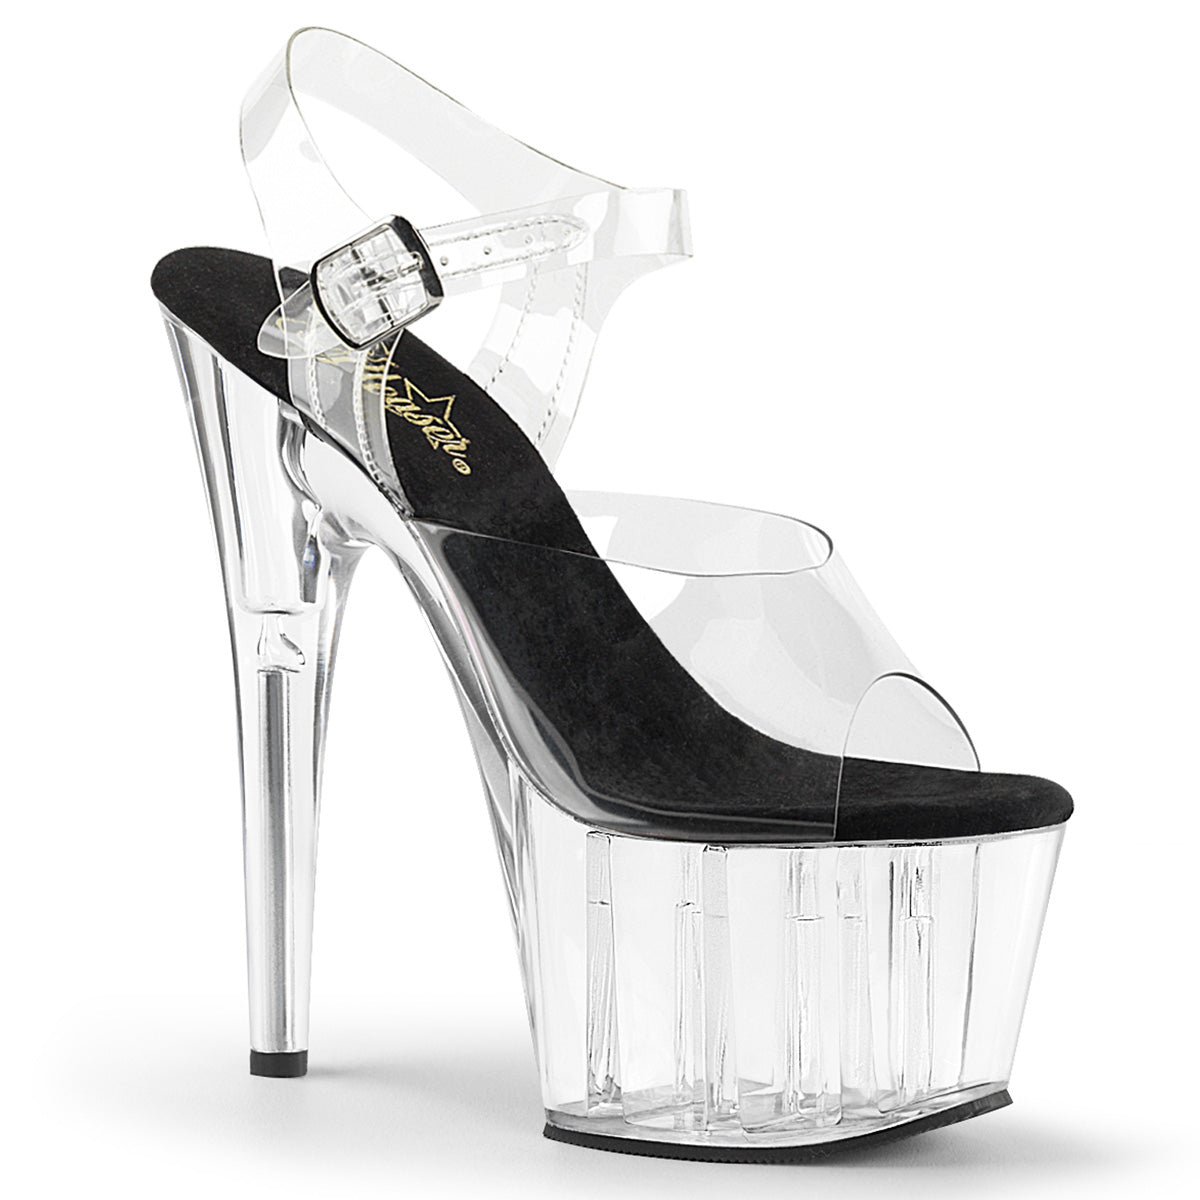 PLEASER ADORE-708 CLEAR 7 INCH HIGH HEEL PLATFORM SHOES Black Sole